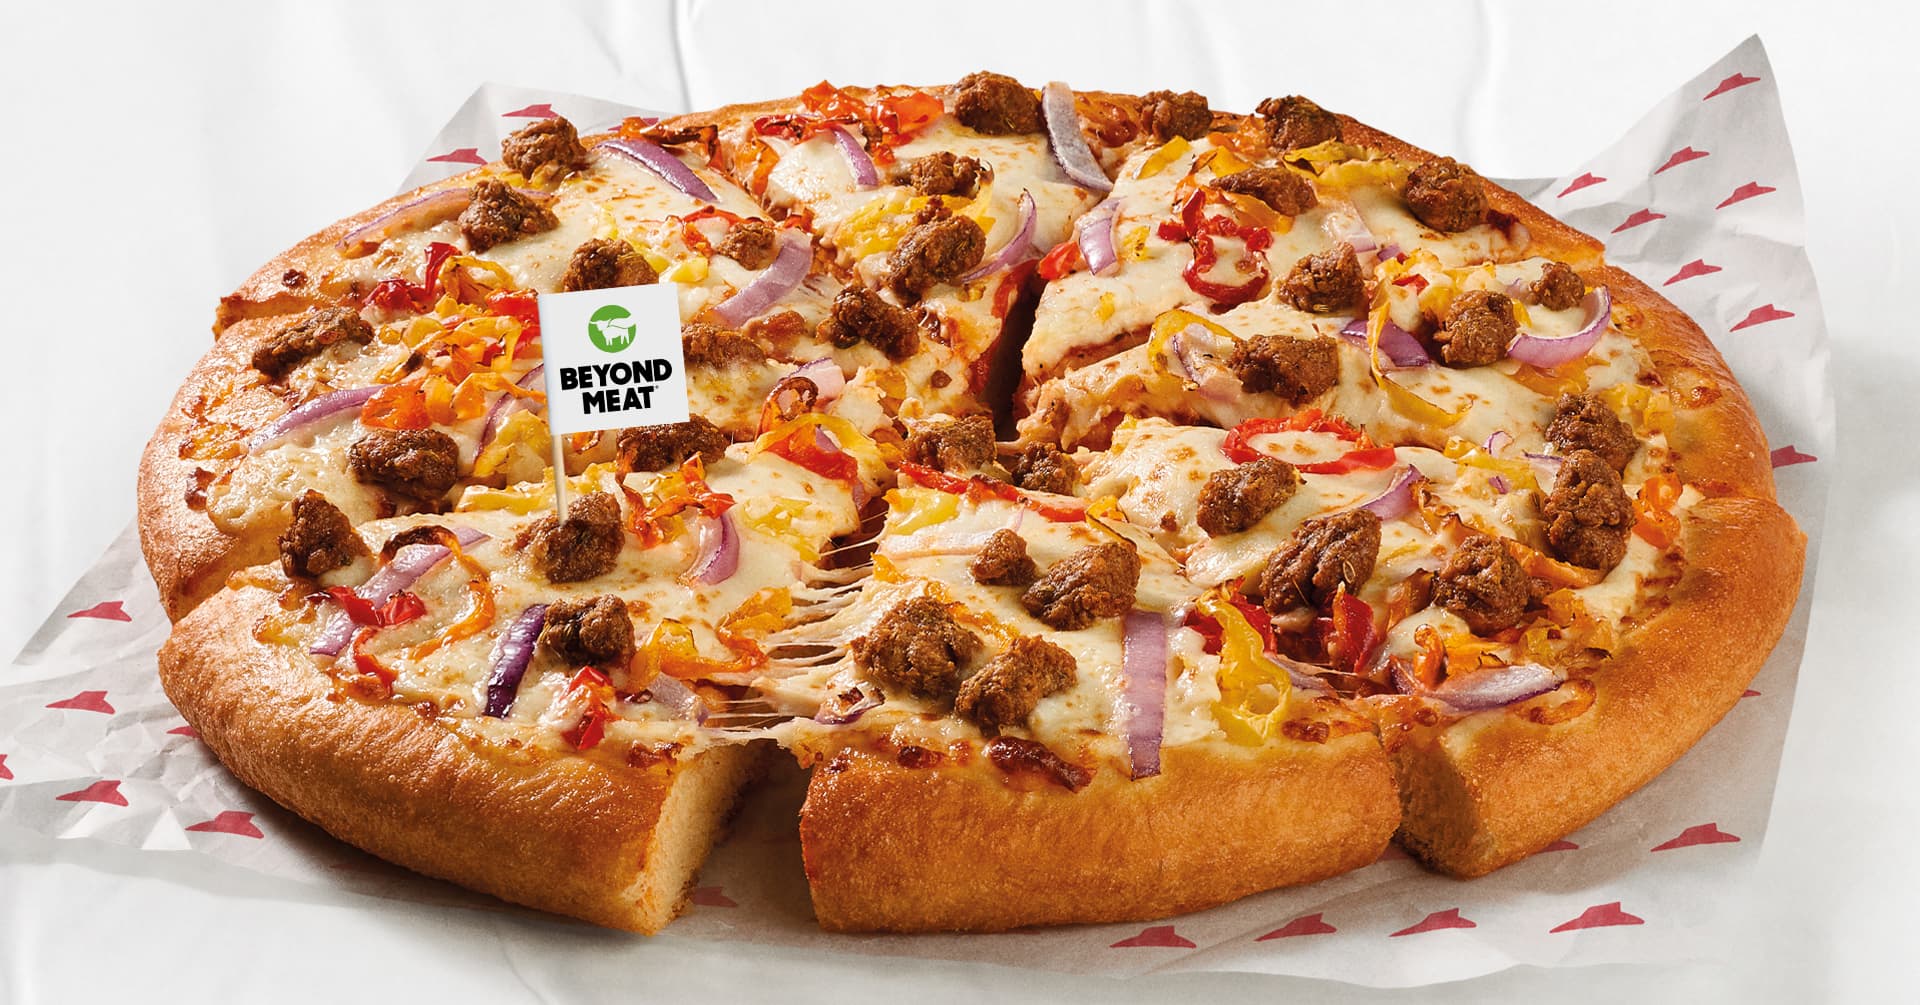 Pizza Hut adds Beyond Meat sausage to Canadian menus permanently